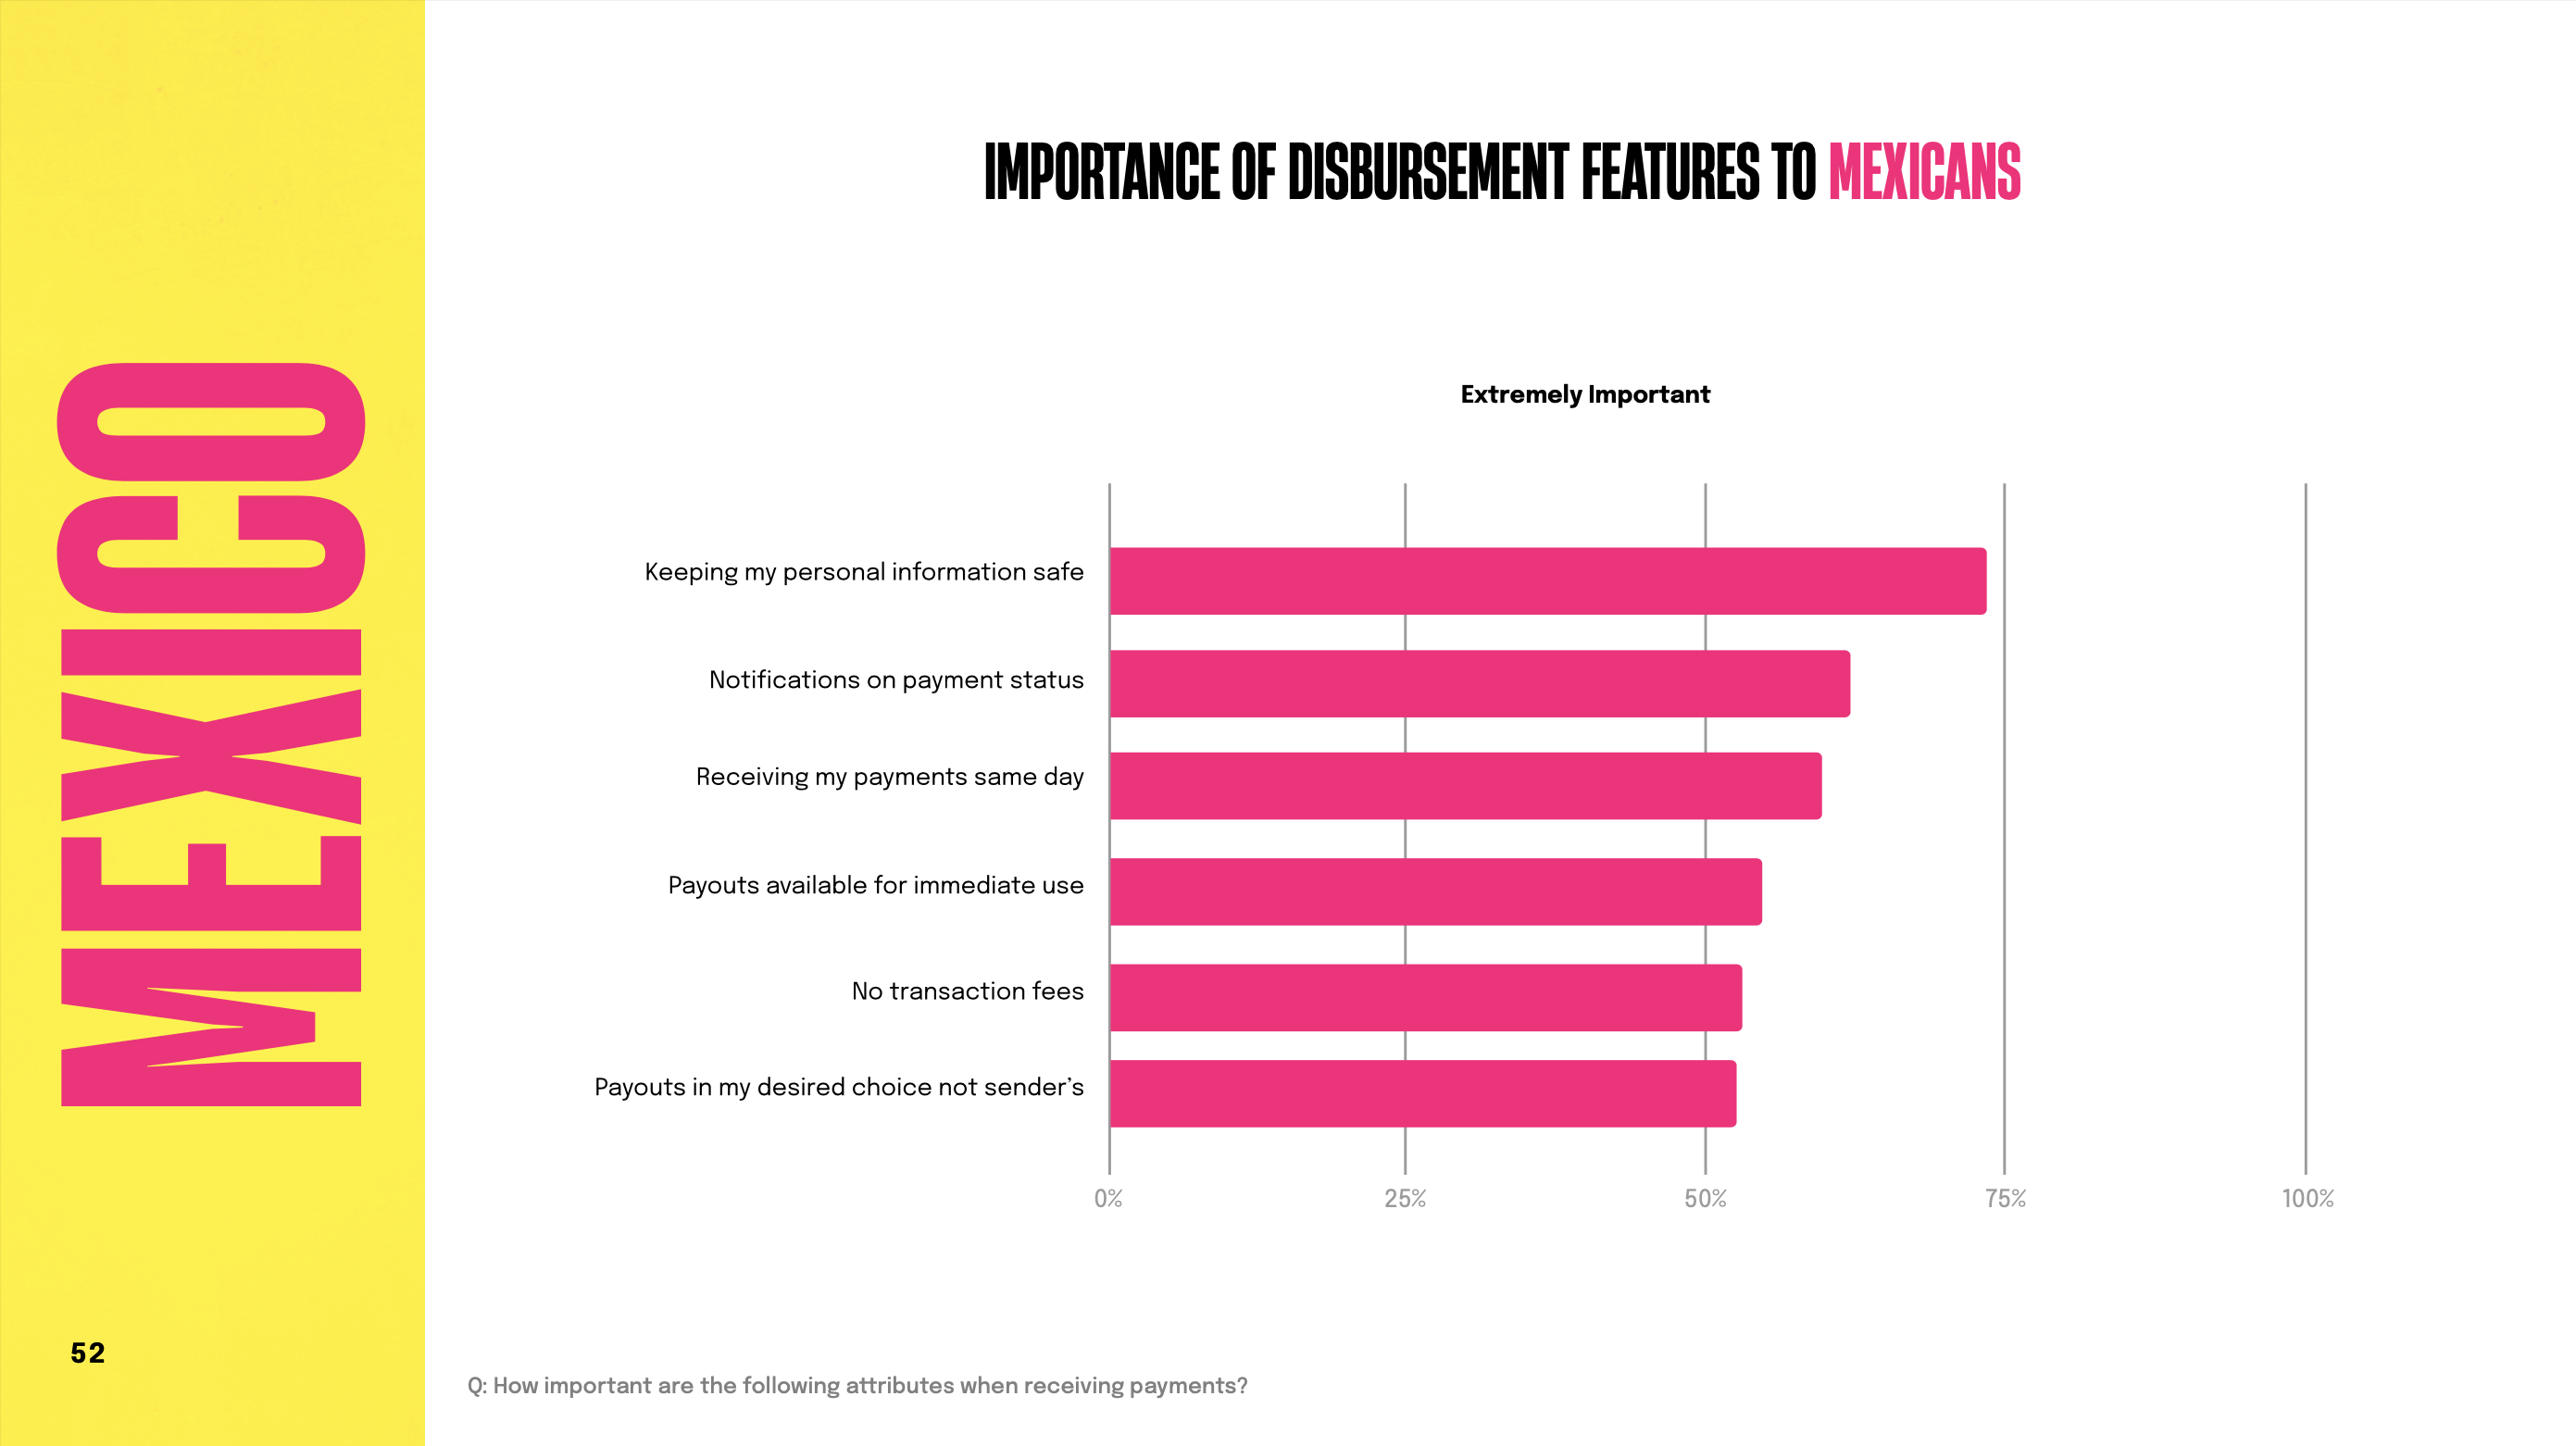 Chart: Importance of Disbursement Features to Mexicans